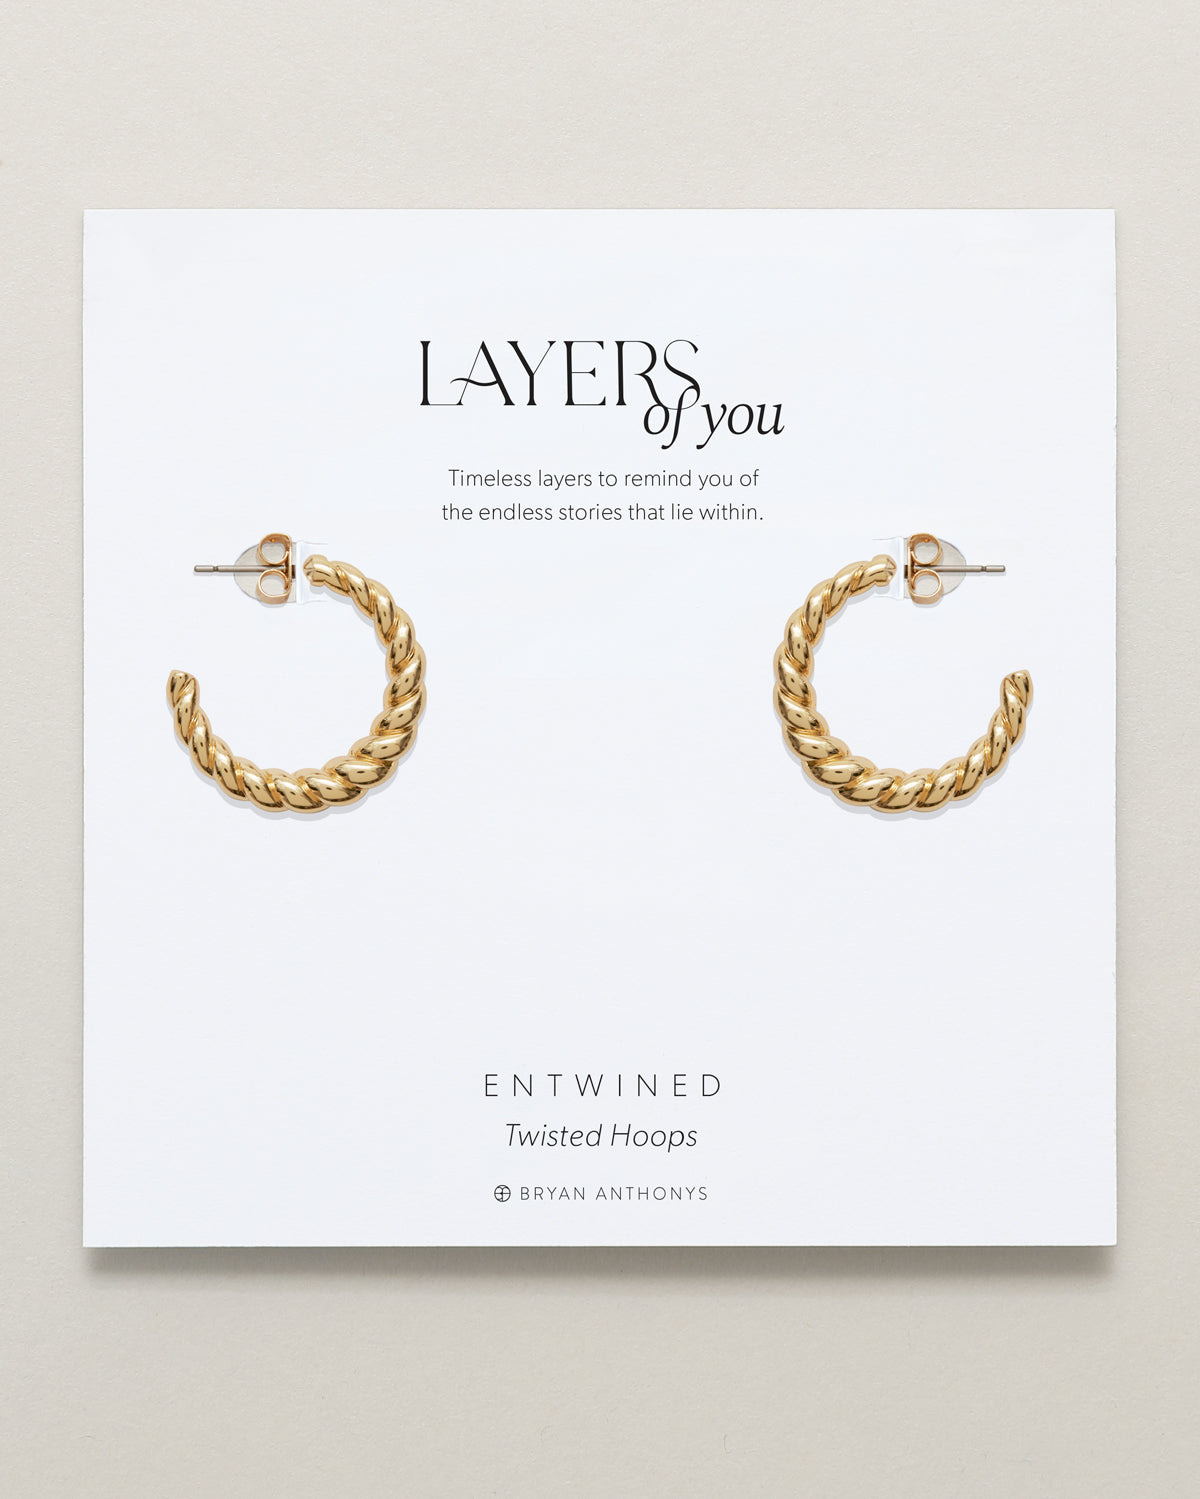 Bryan Anthonys Layers of You Gold Entwined Twisted Hoops On Card